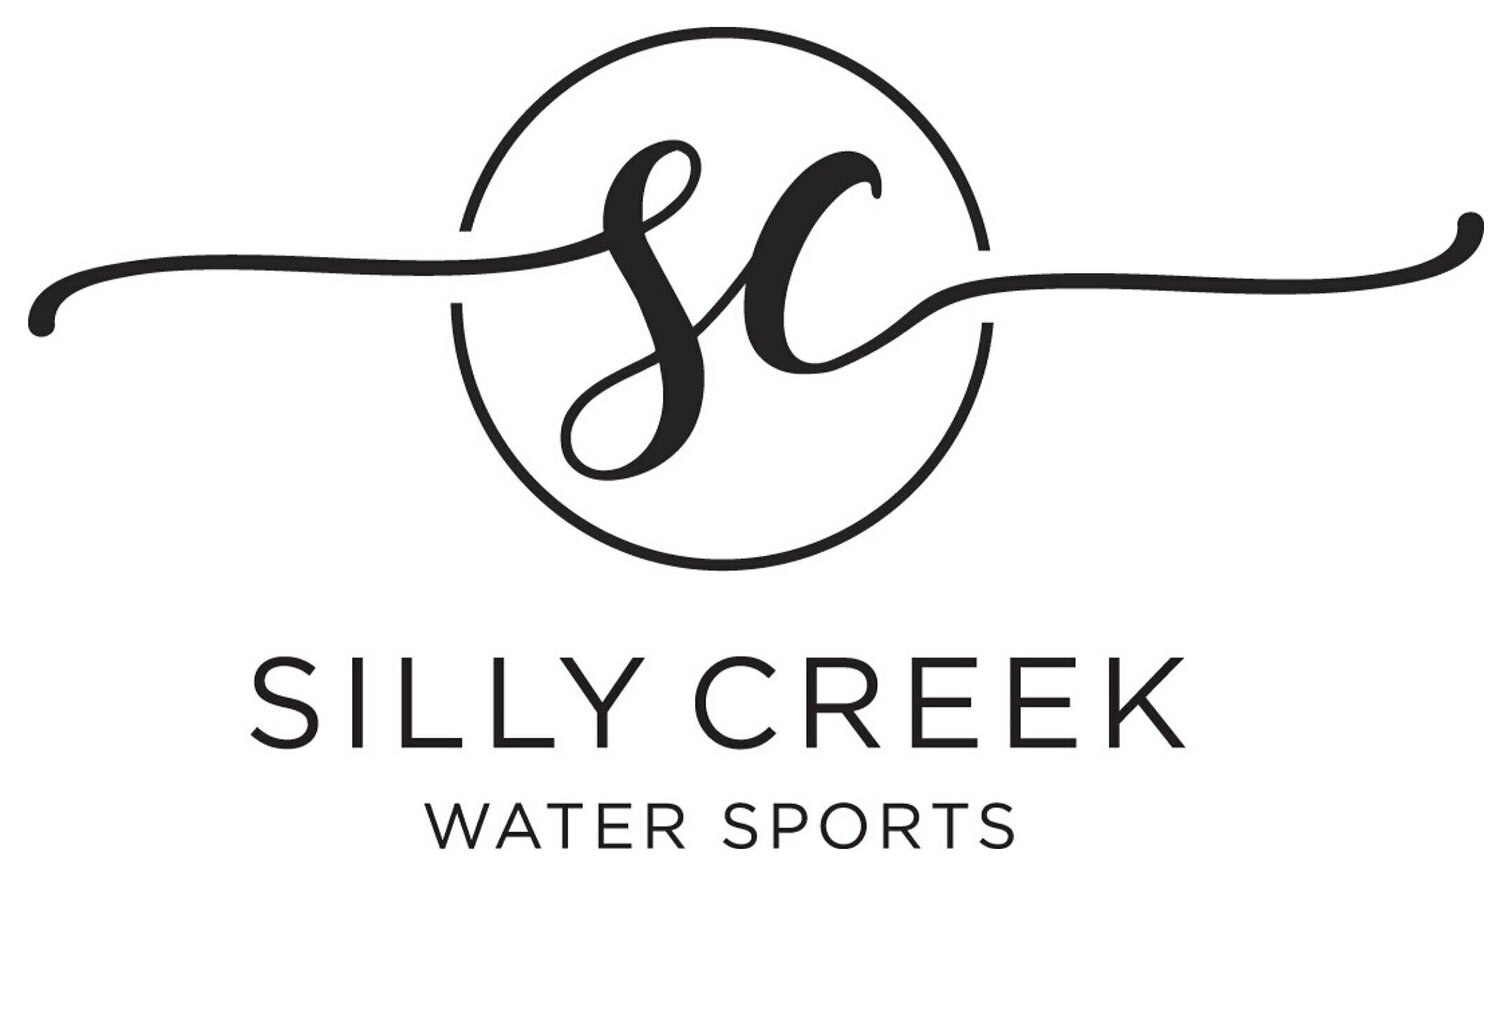 Silly Creek Water Sports